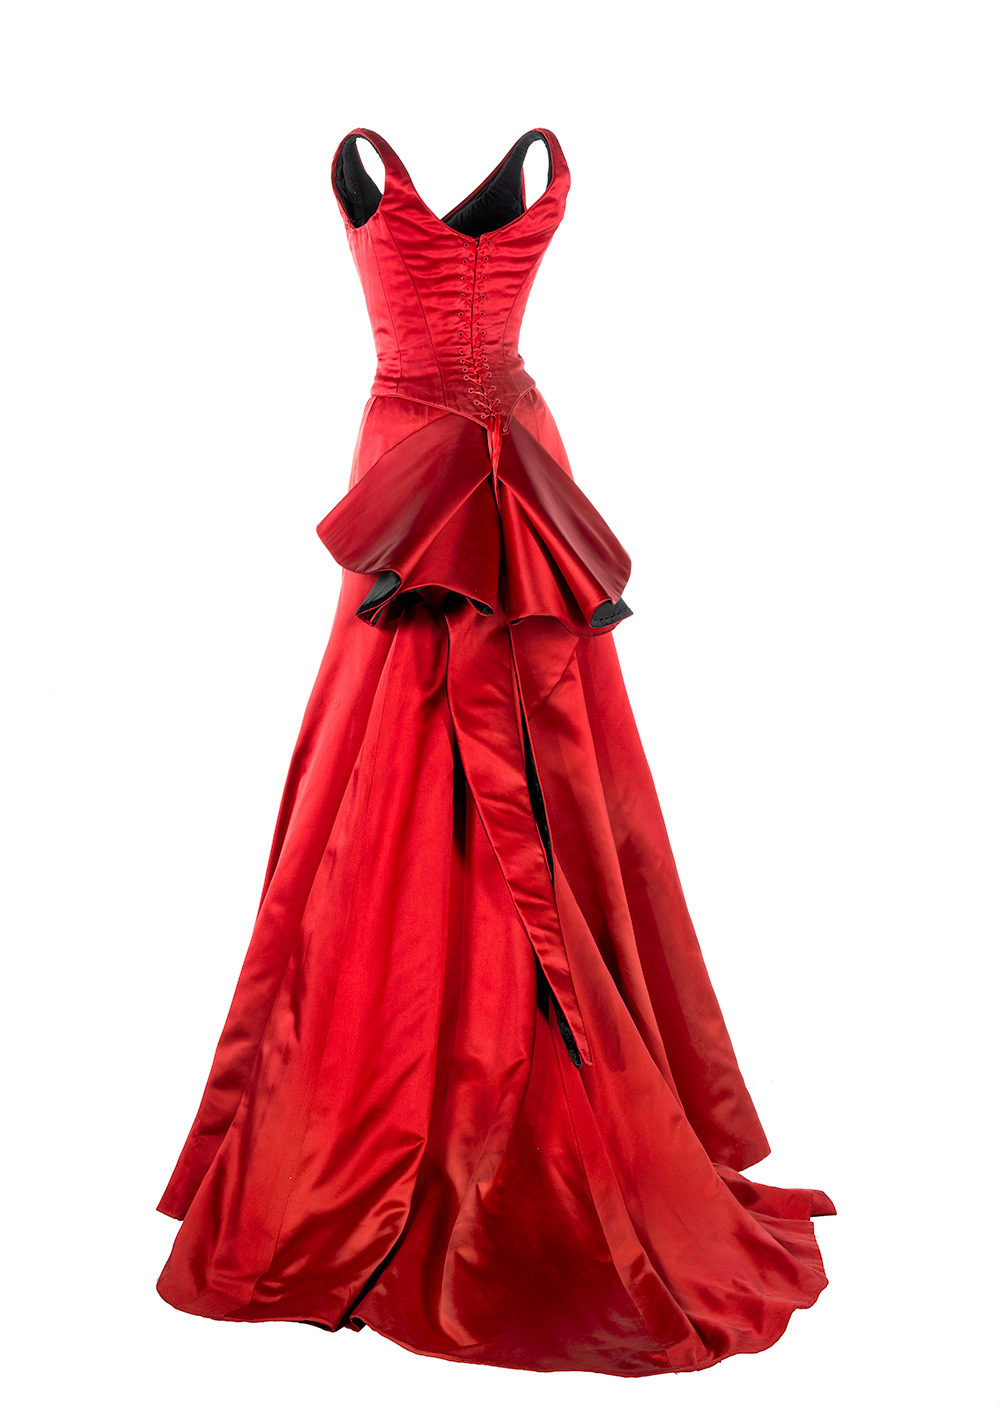 Back view of red satin dress worn by Nicole Kidman in Moulin Rouge!